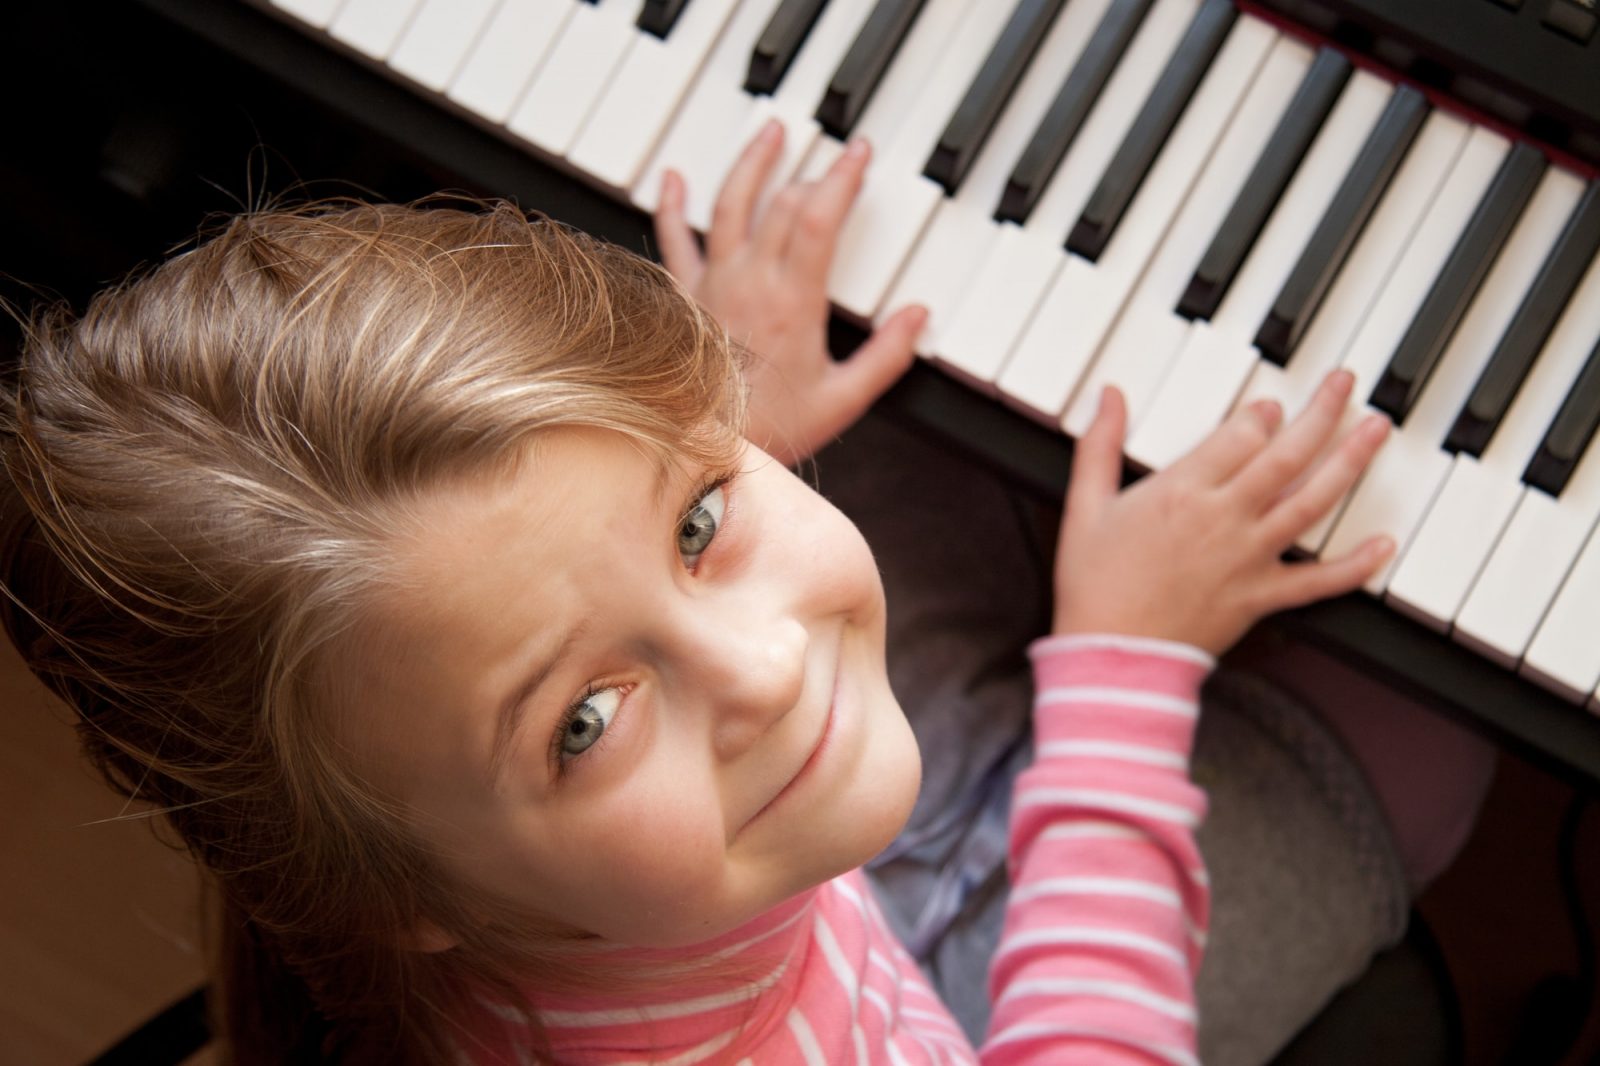 7 Easy Piano Songs to Play